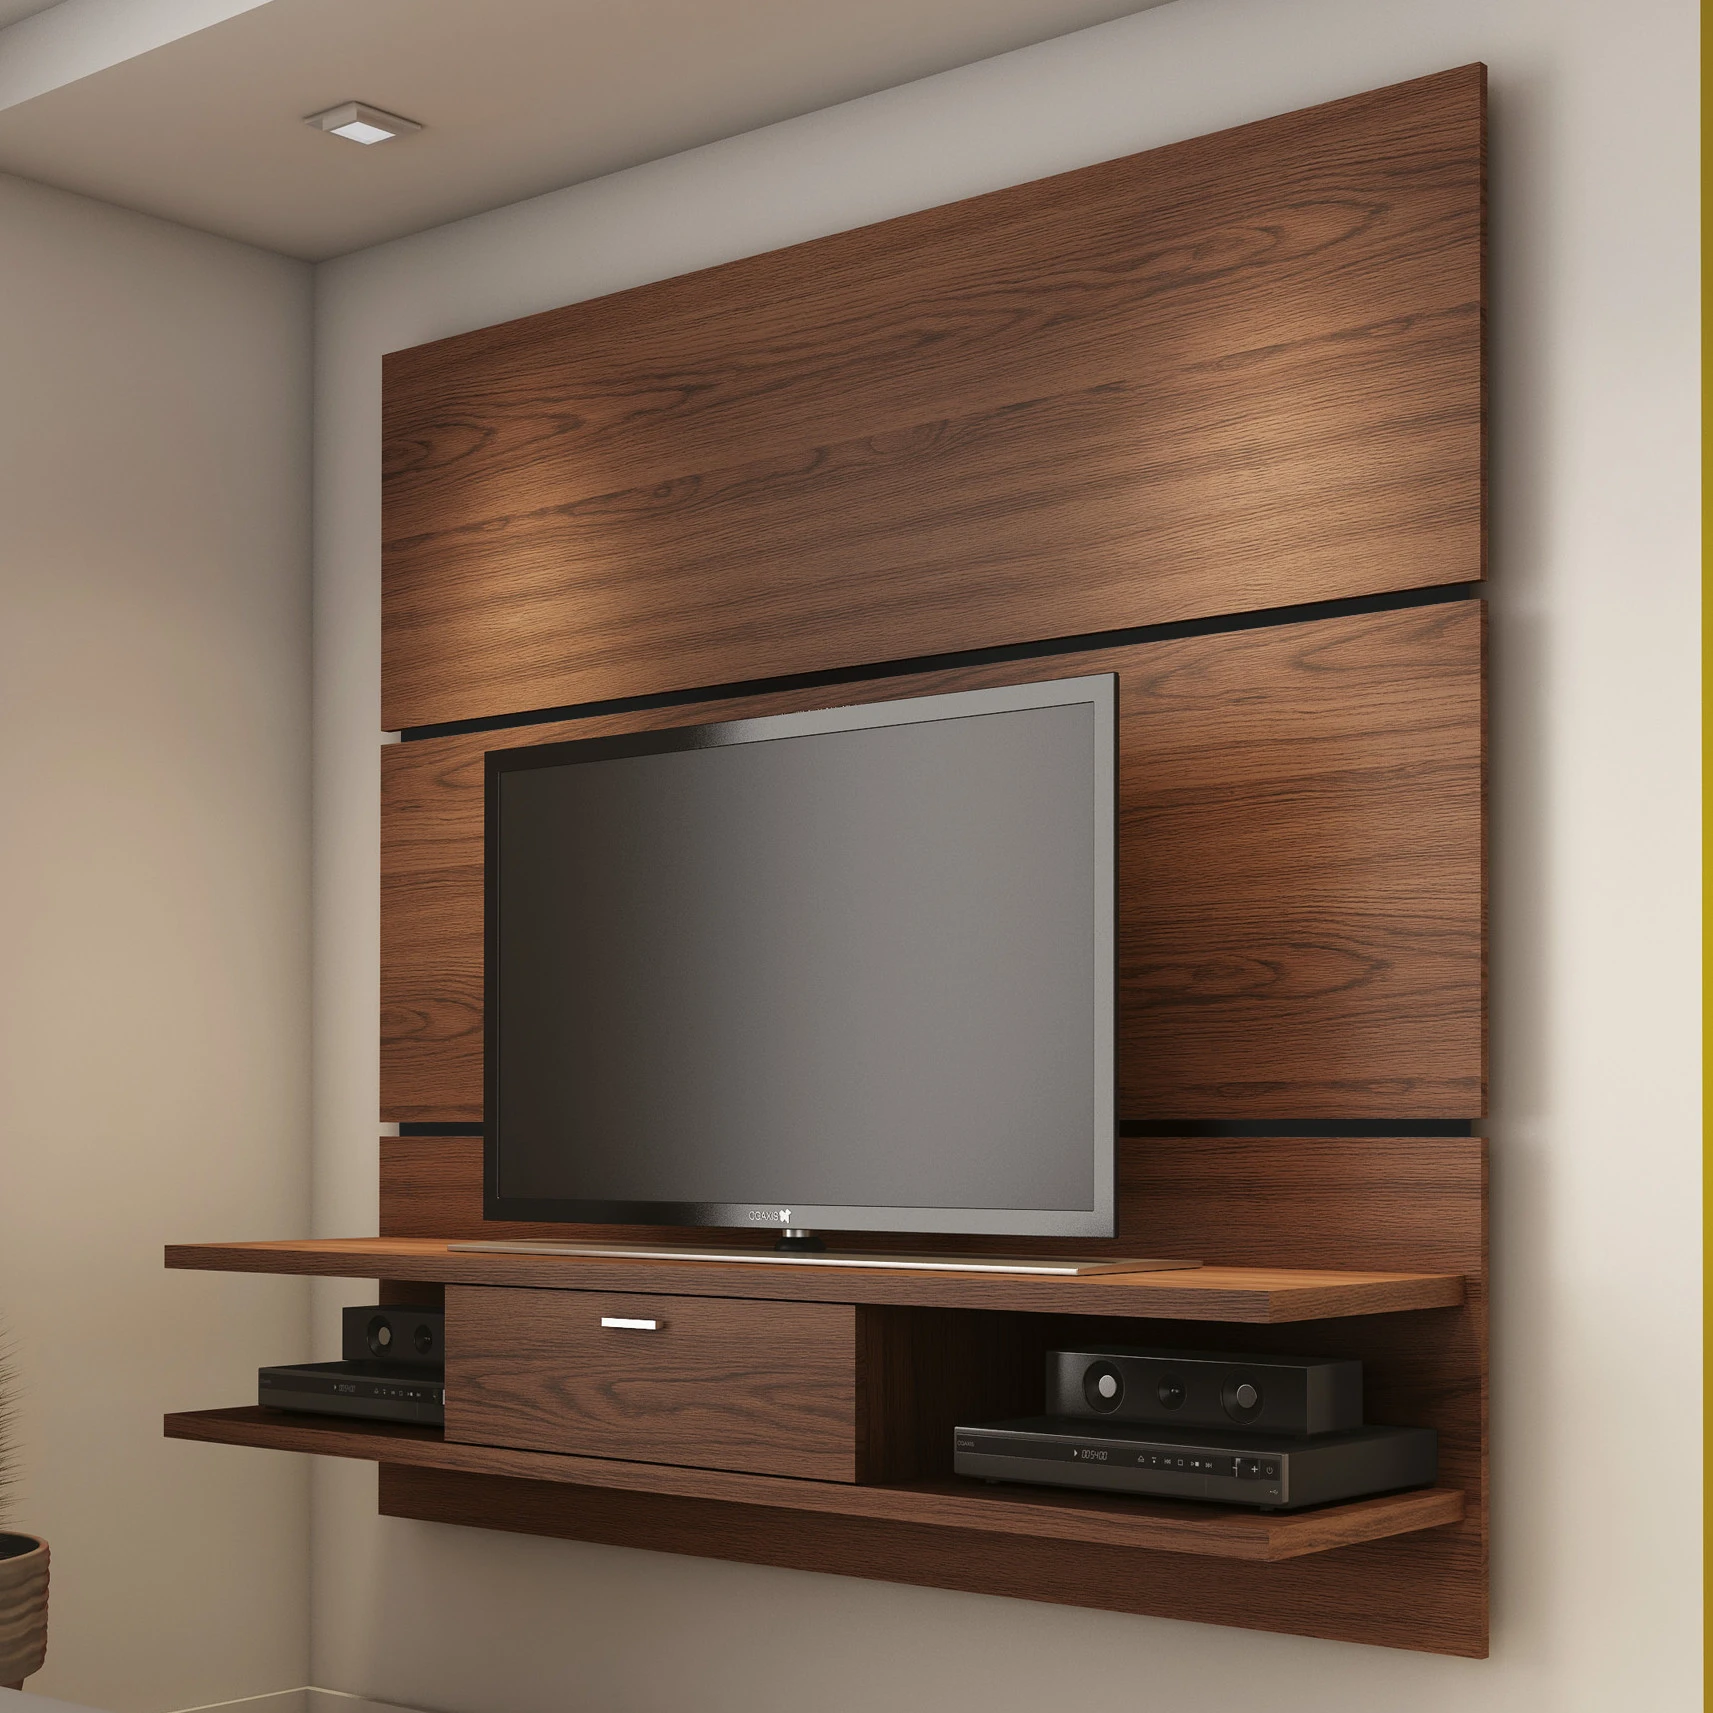 Outside Tv Wall Cabinet Cable Tv Box Cabinet Light Buy Cable Tv Box Cabinet